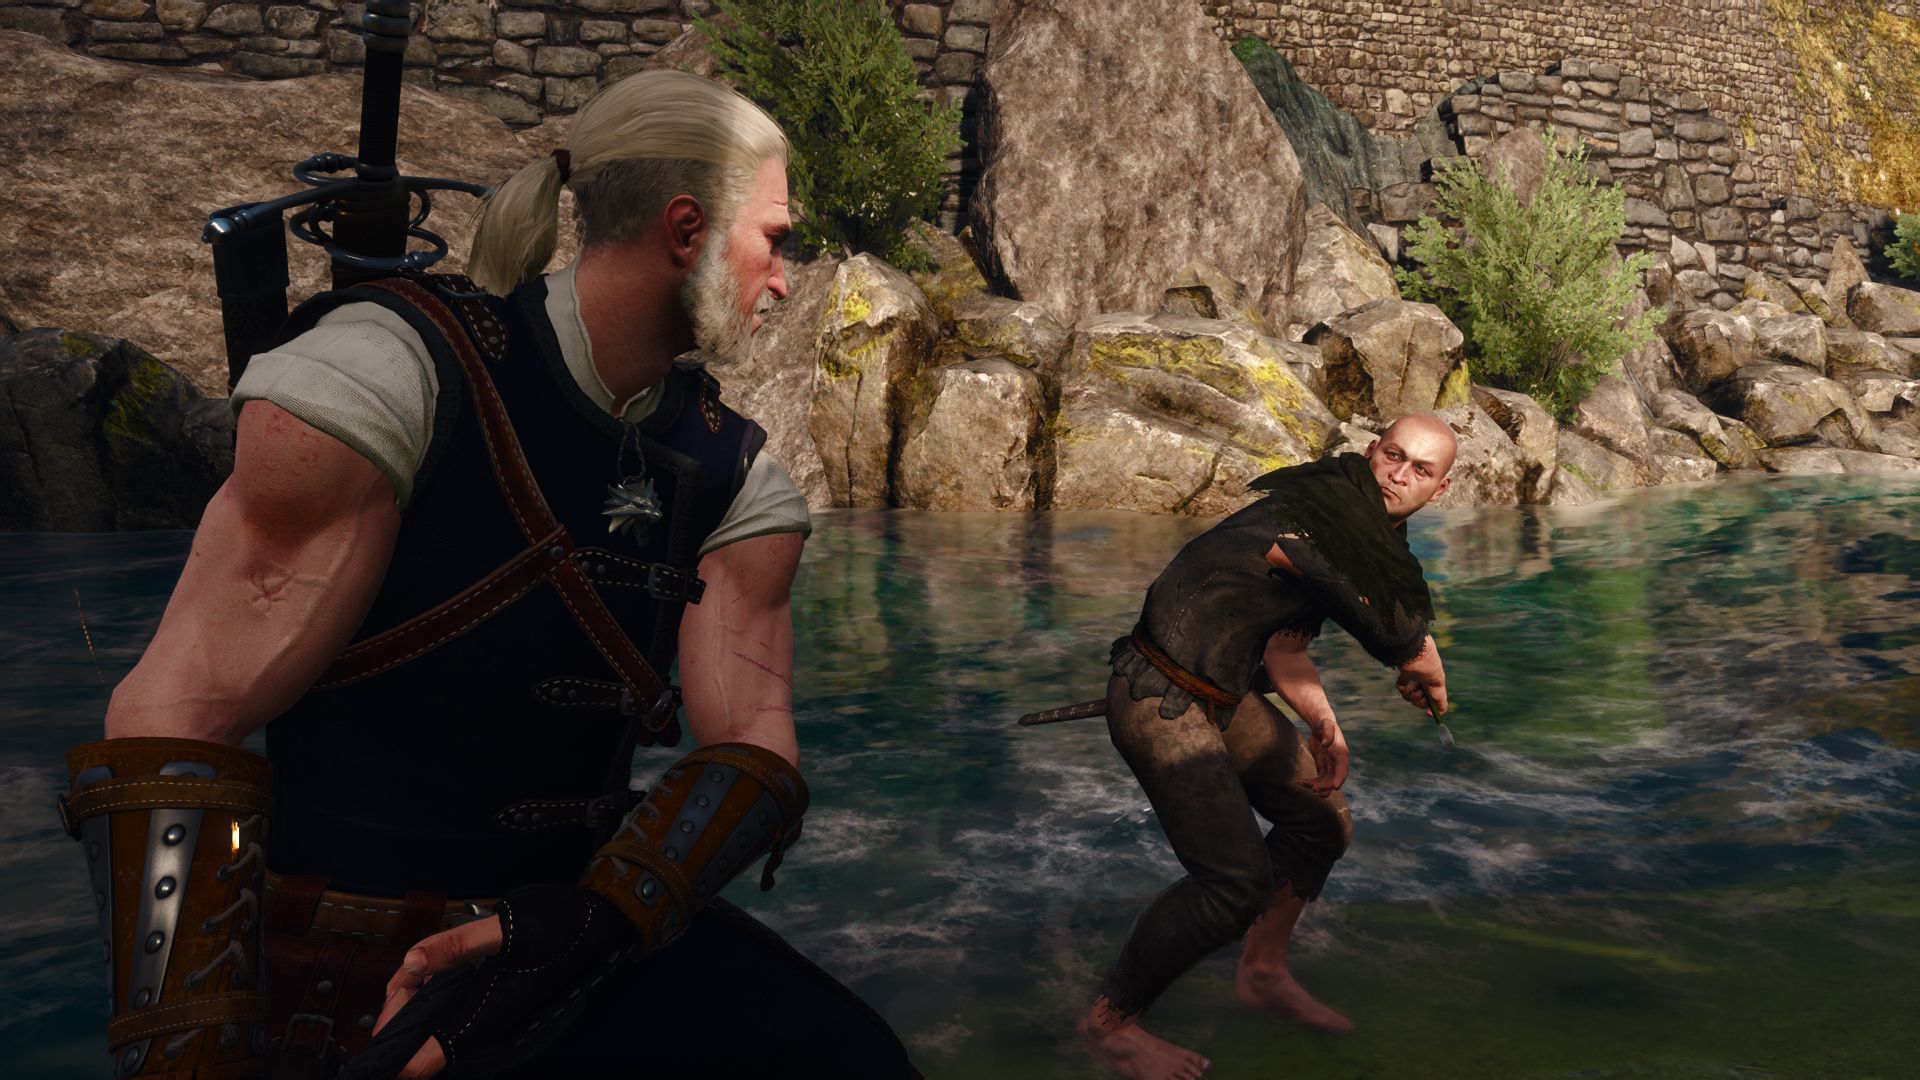 Geralt braces as a doppler attempts to hit him with a sword by the Novigrad moat.